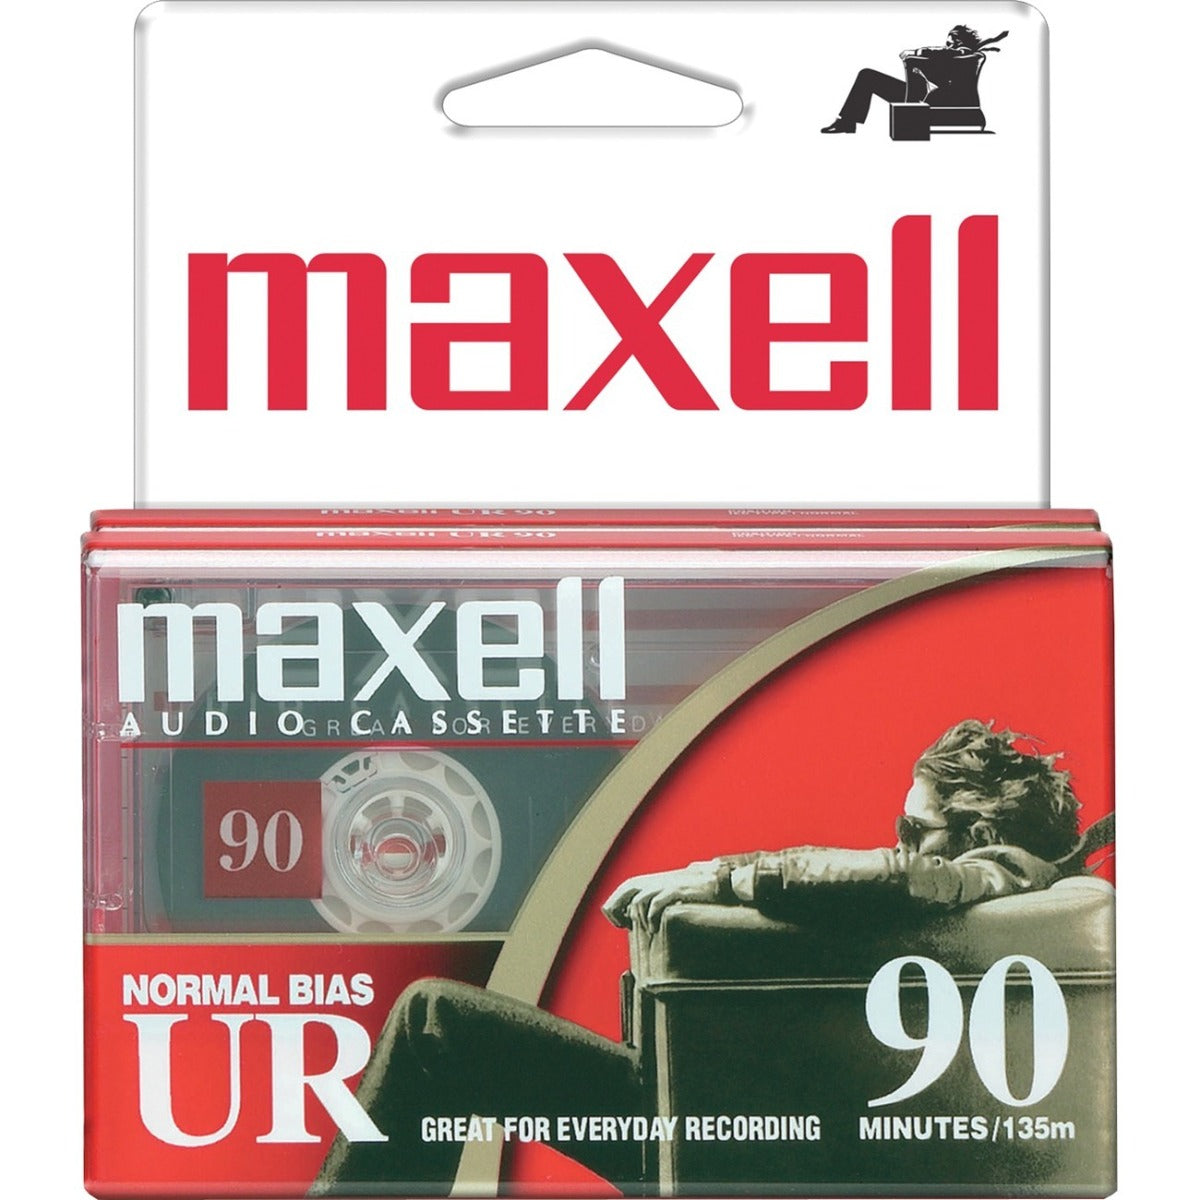 Maxell | Maxell 108527 UR-90 2PK Normal Bias Audio Cassettes 90 Minute With Cases 2 Pack | Cassette